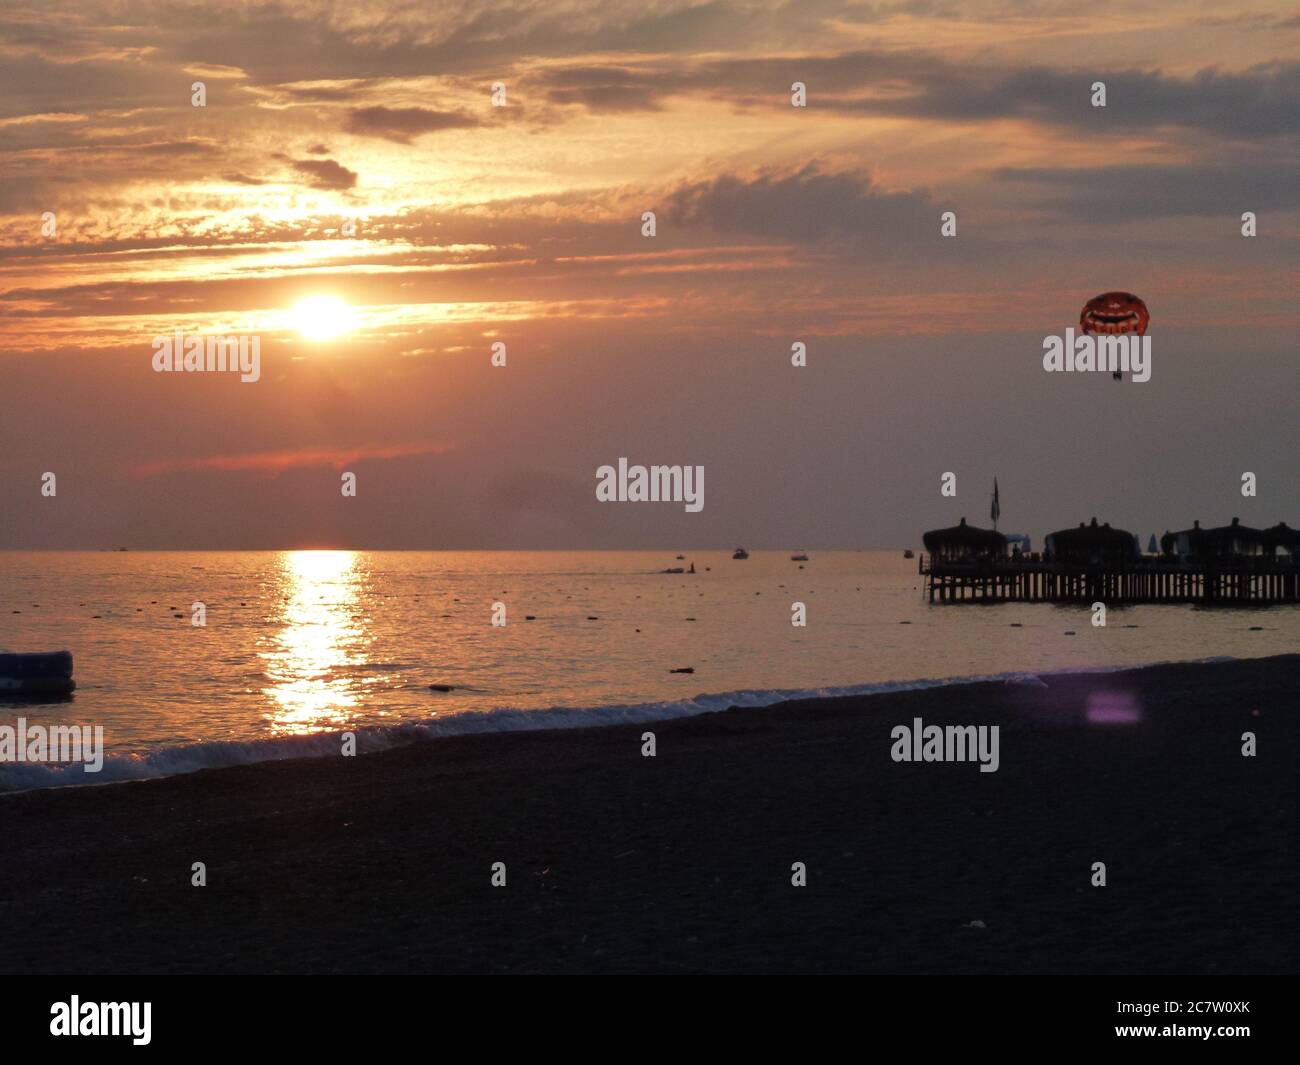 Turkey Holiday Beach Sunset Banque D'Images